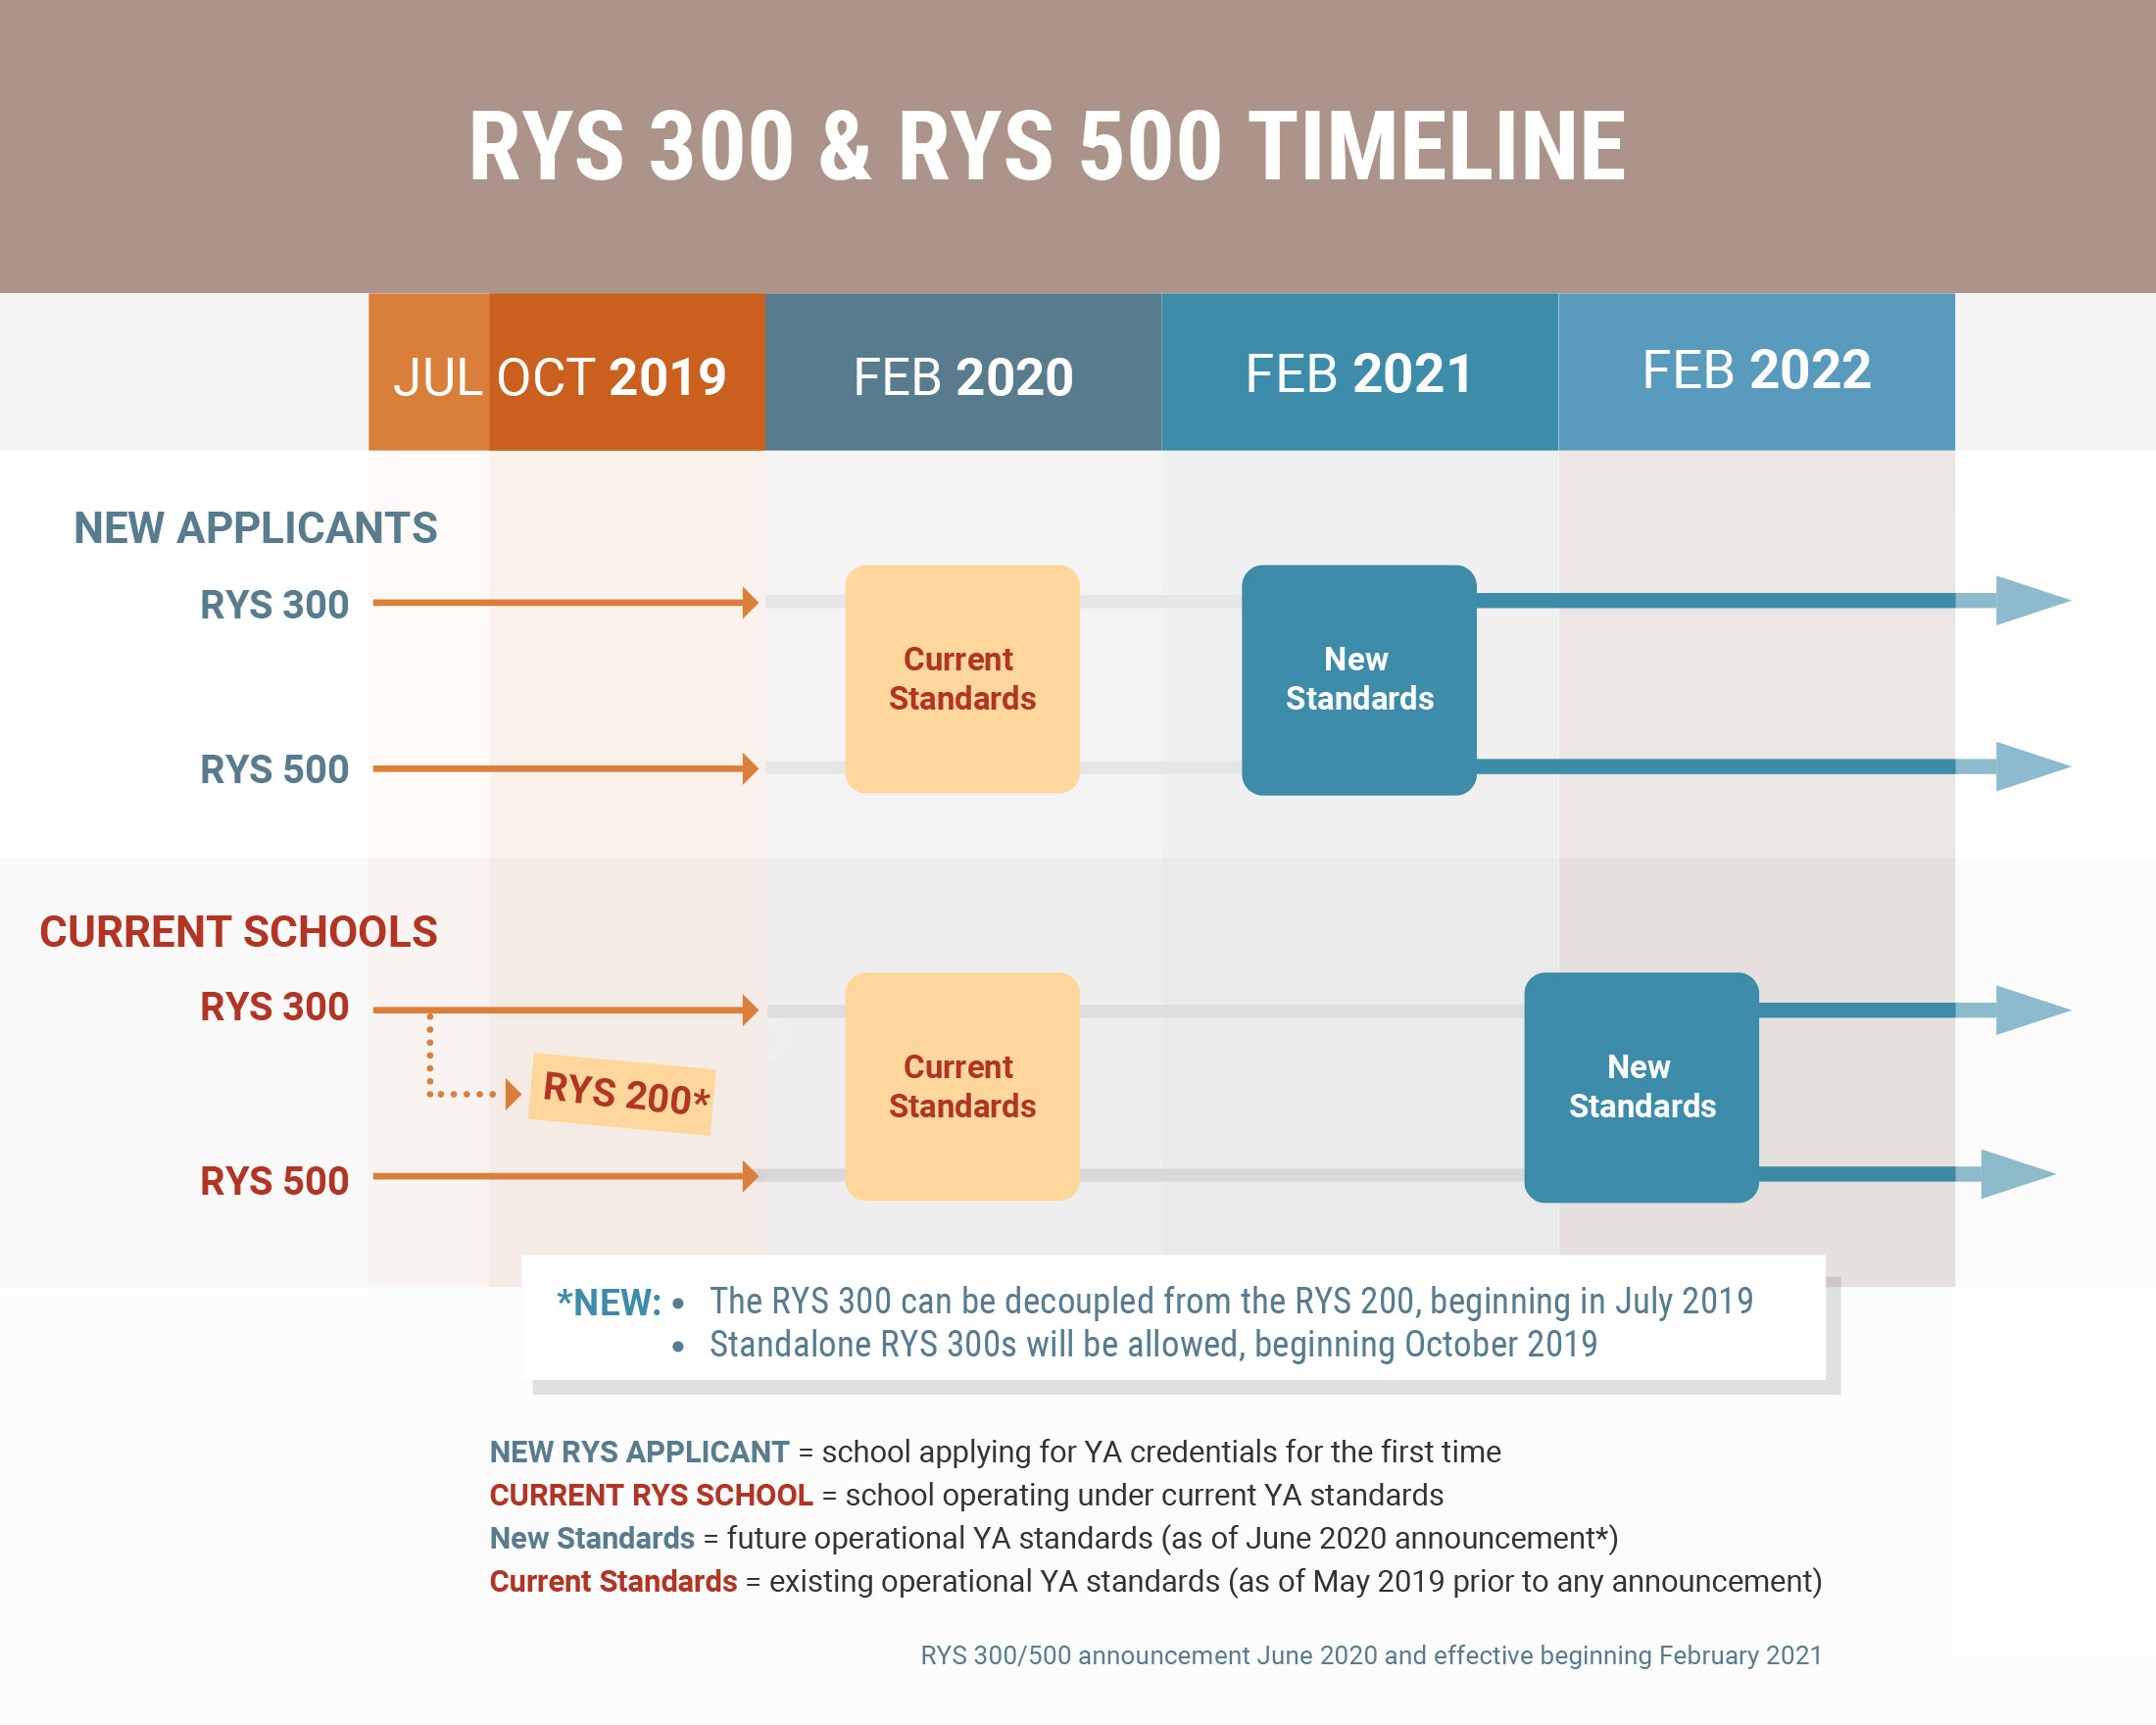 RYS 300 and RYS 500 Initial Outcomes